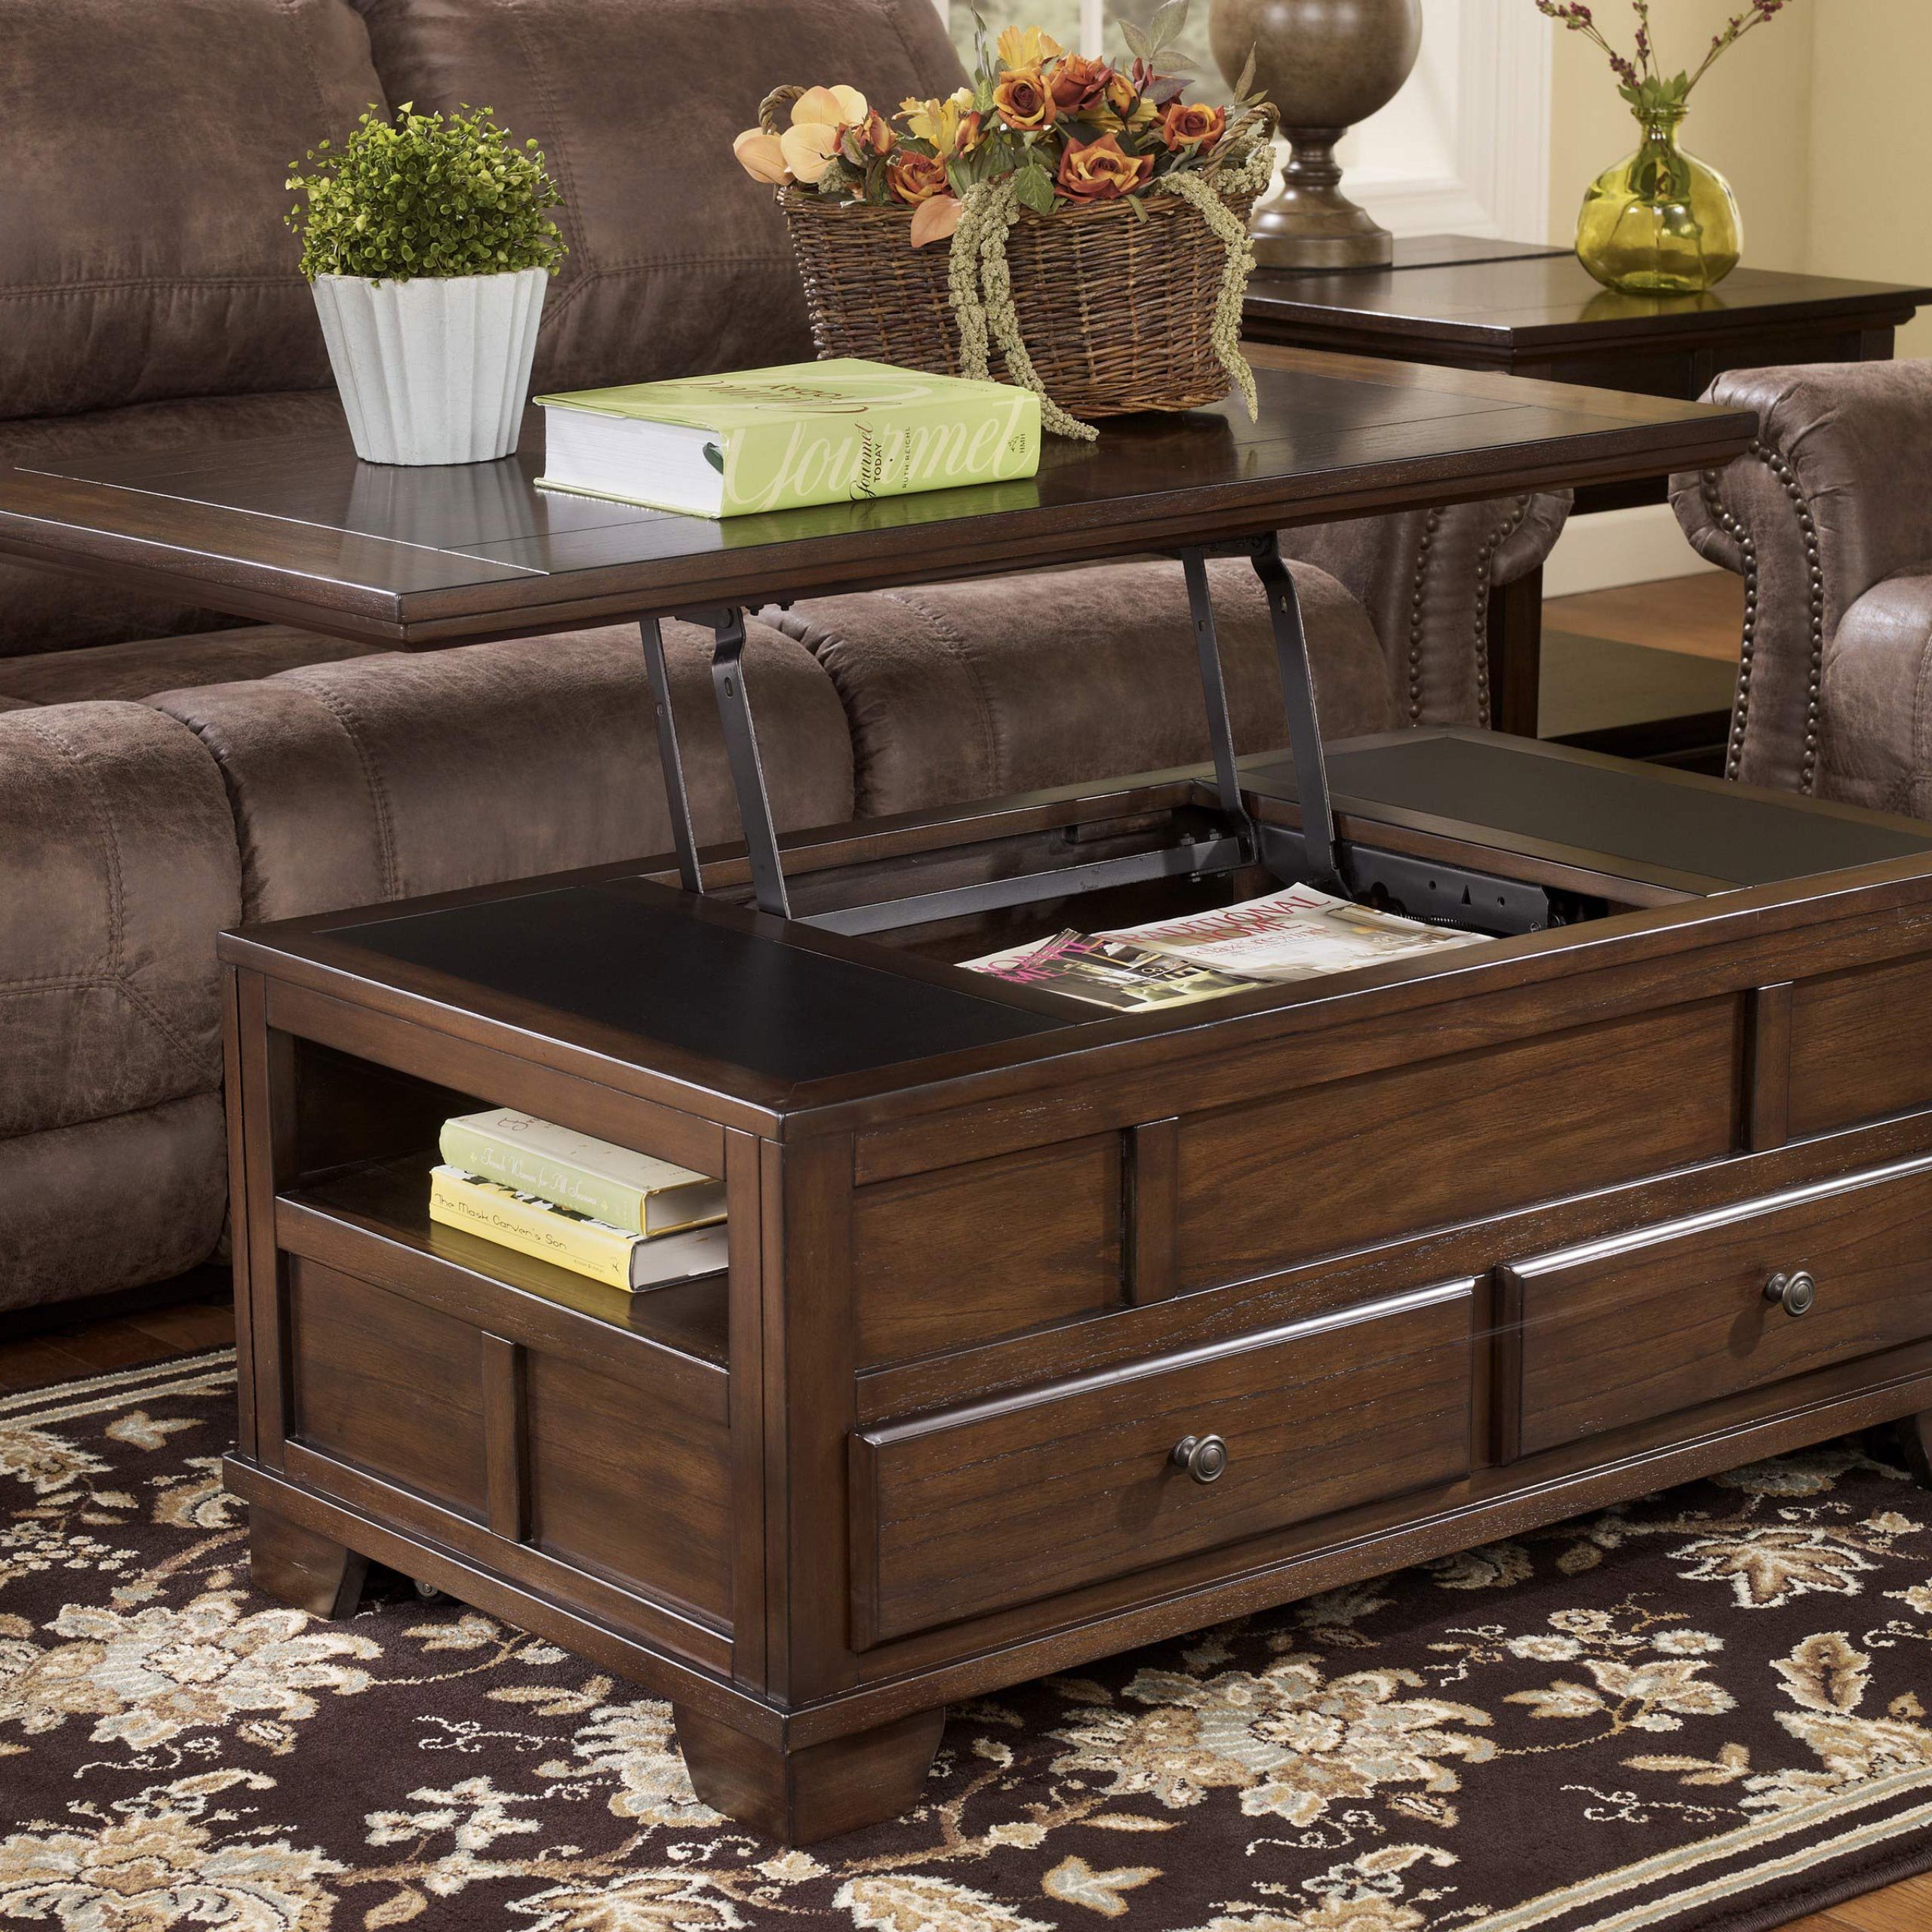 Lift Top Coffee Tables With Storage With Regard To Most Recent Coffee Tables With Storage (View 12 of 15)